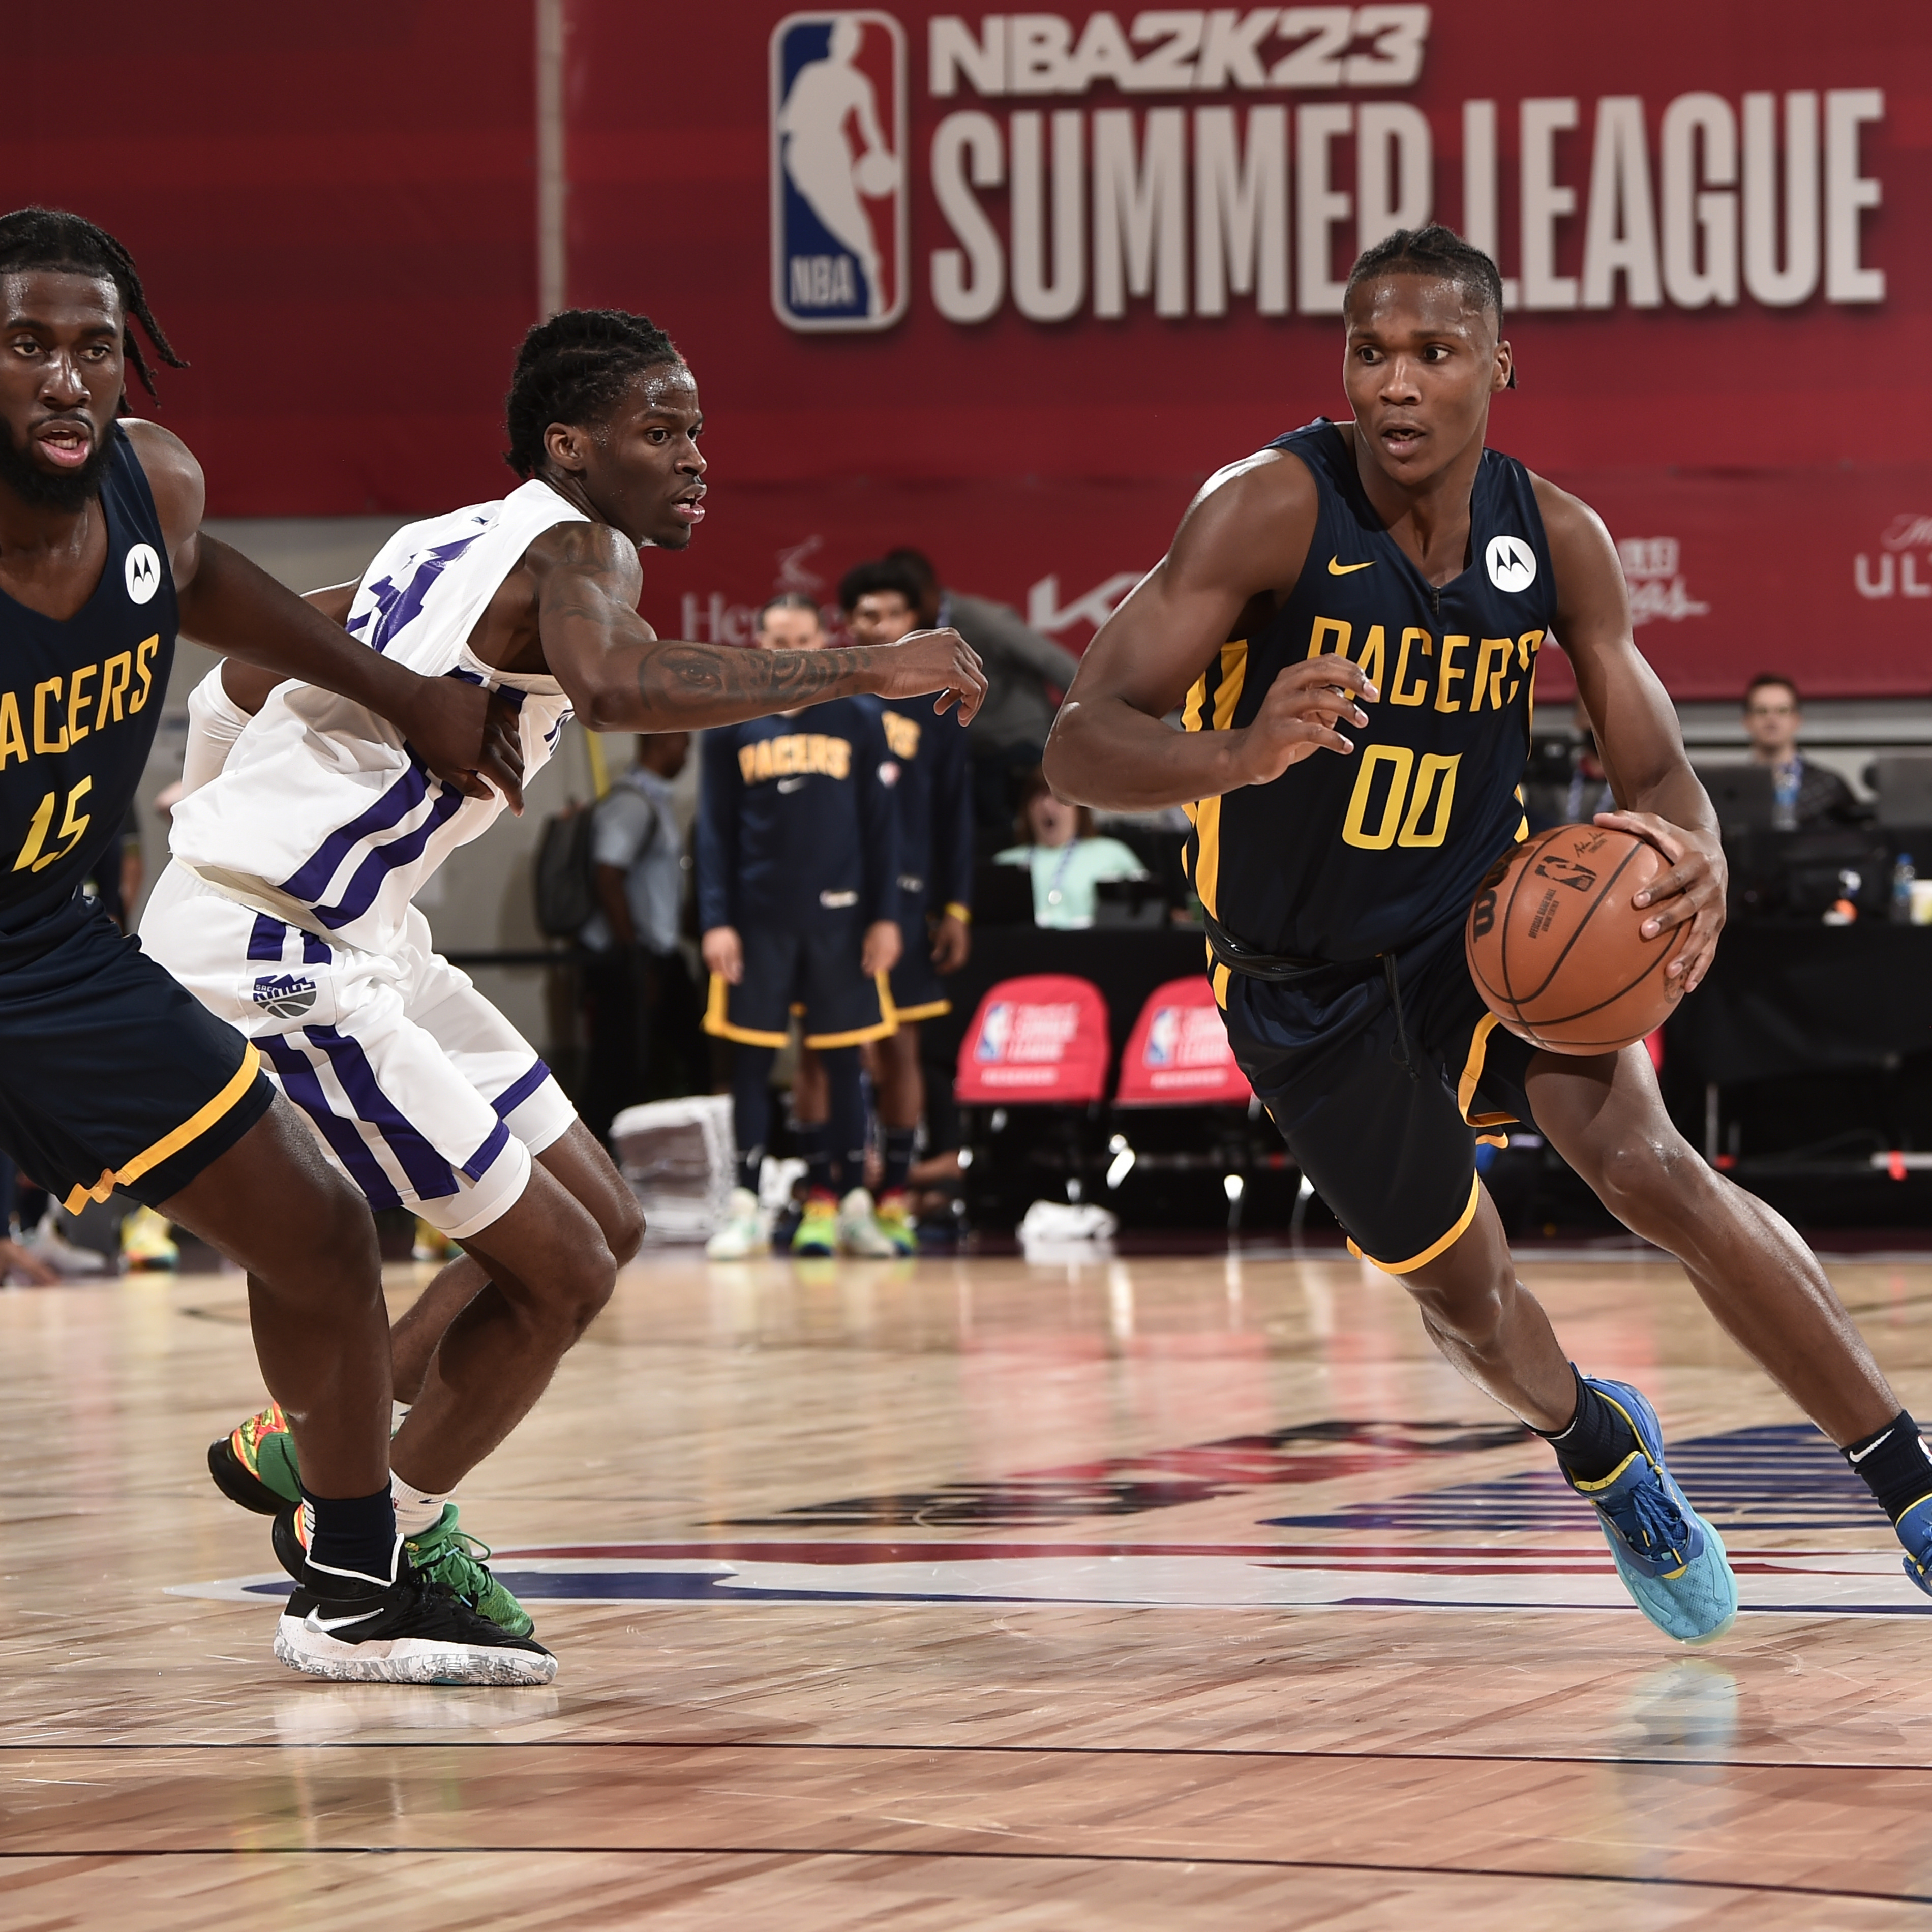 Hot Takes from Pacers’ Bennedict Mathurin Summer League Game